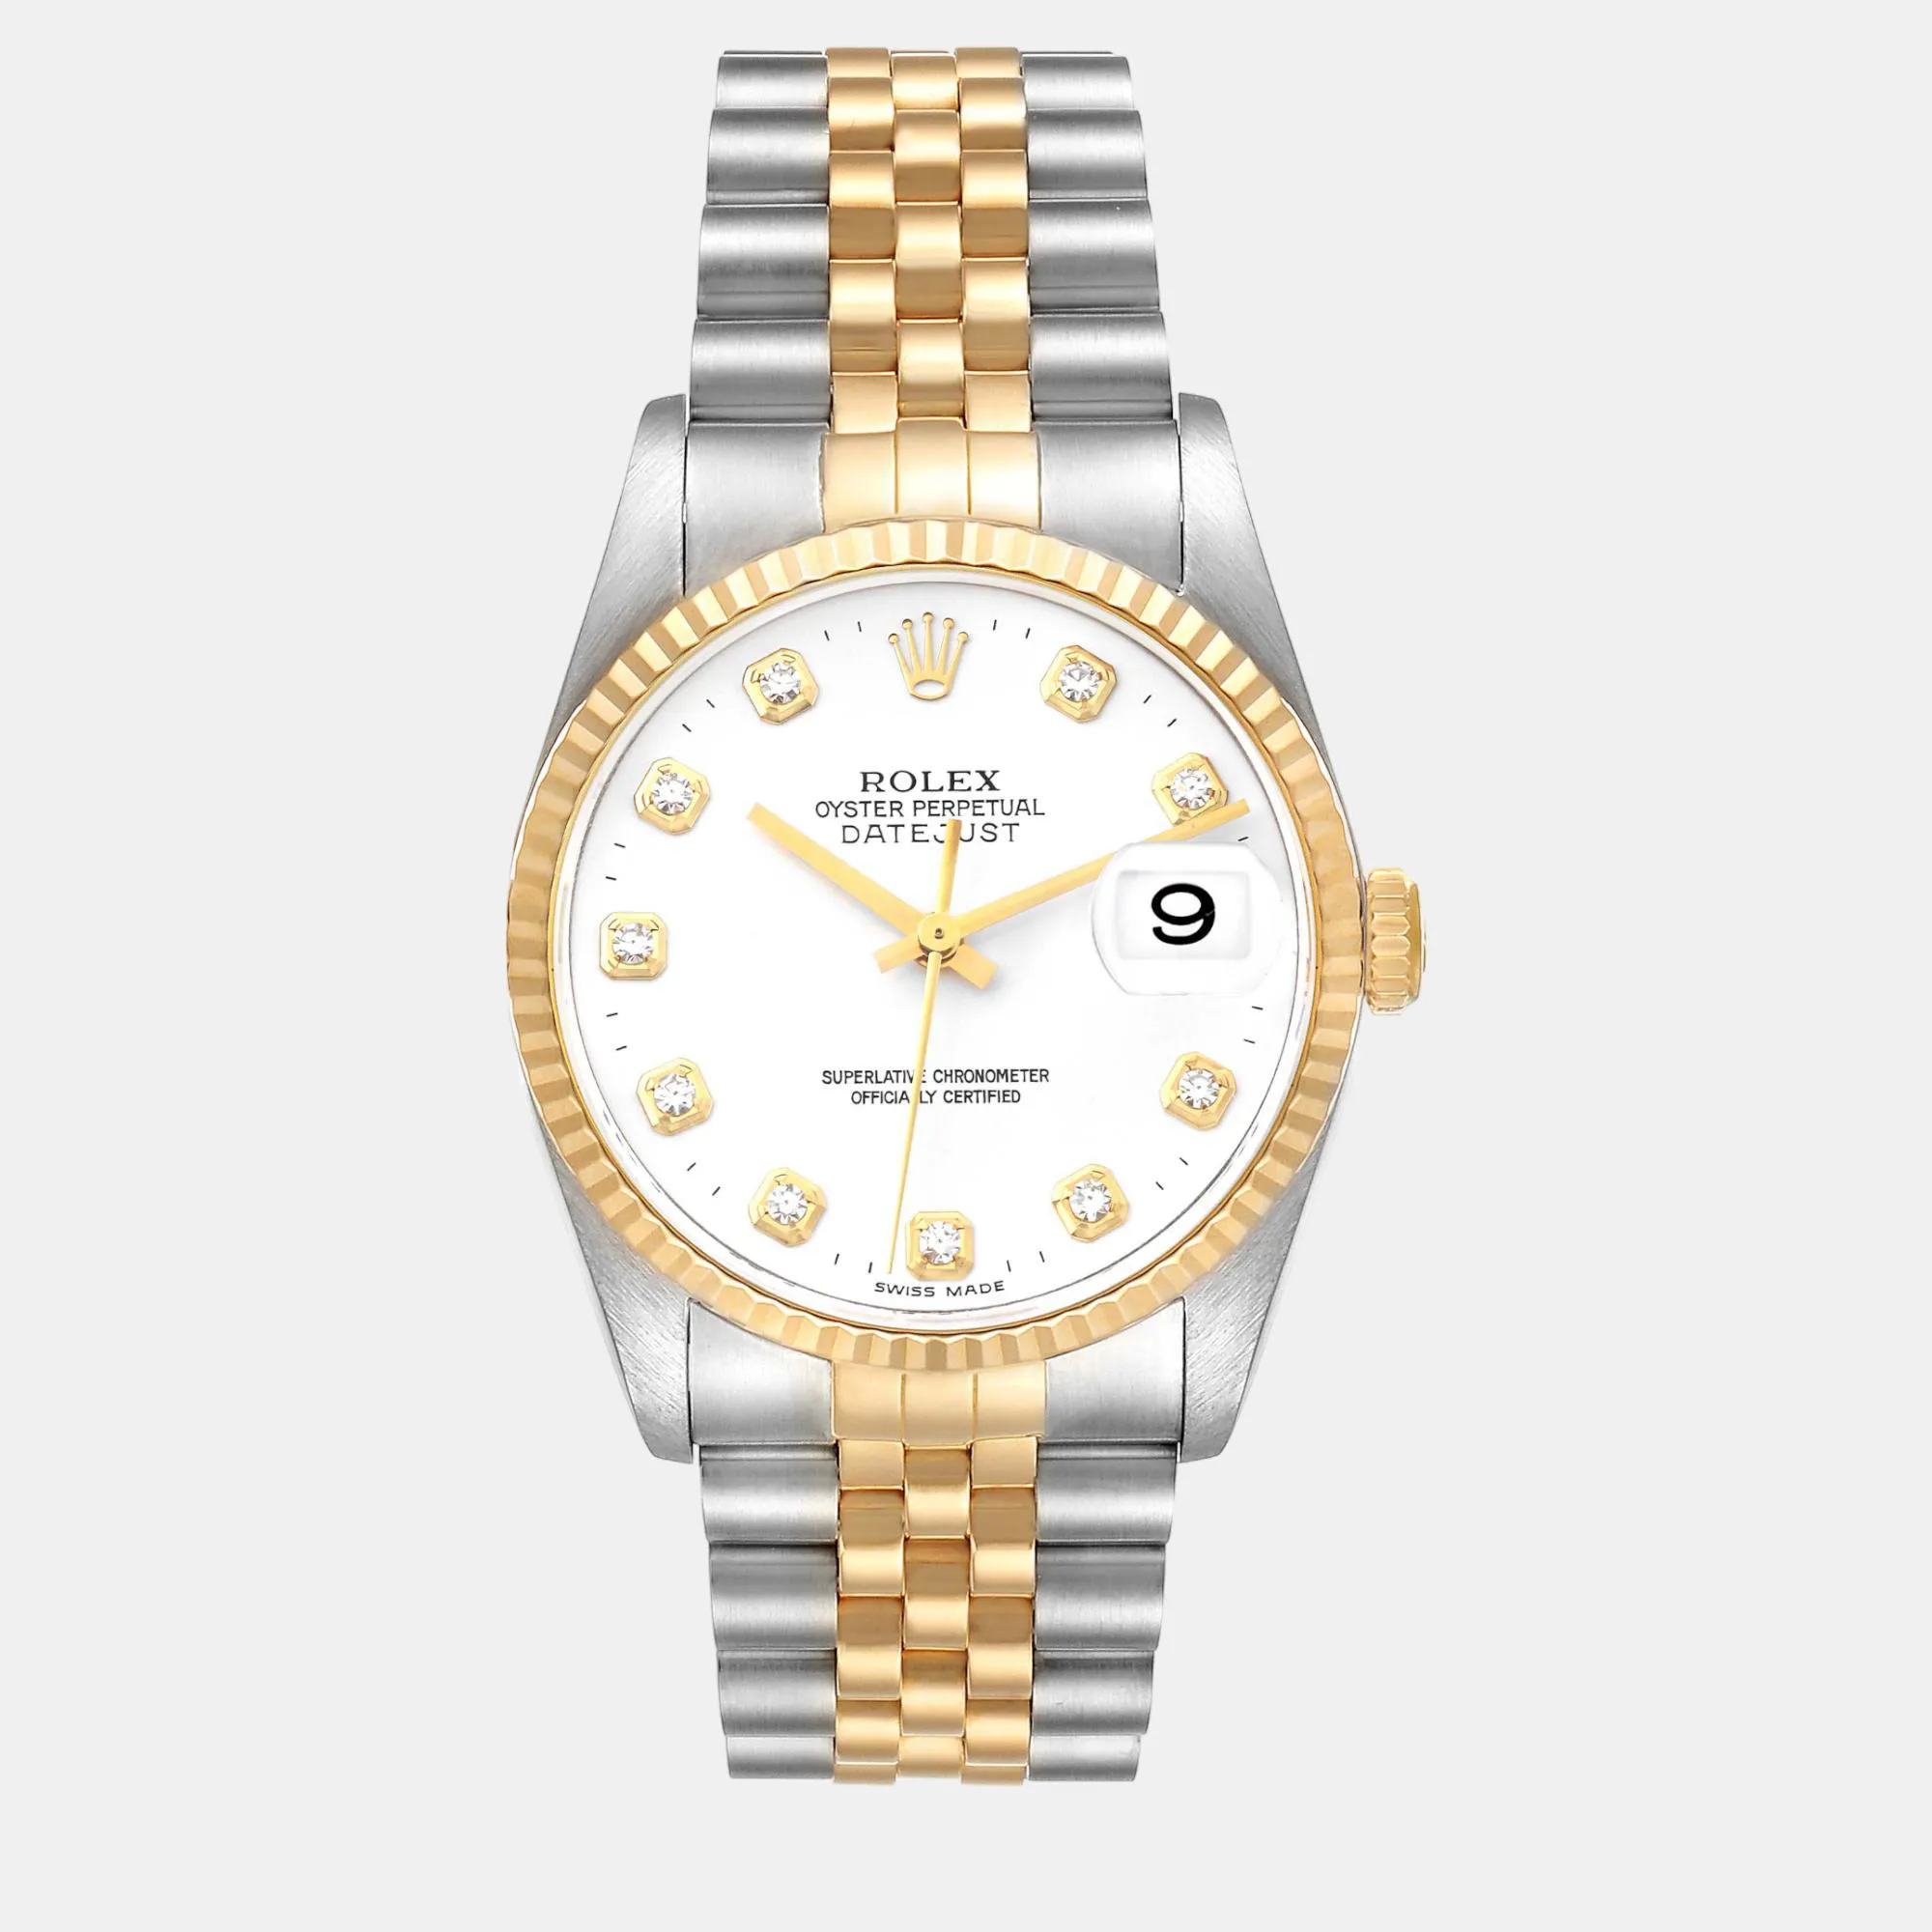 Rolex Datejust 36mm Yellow gold and stainless steel